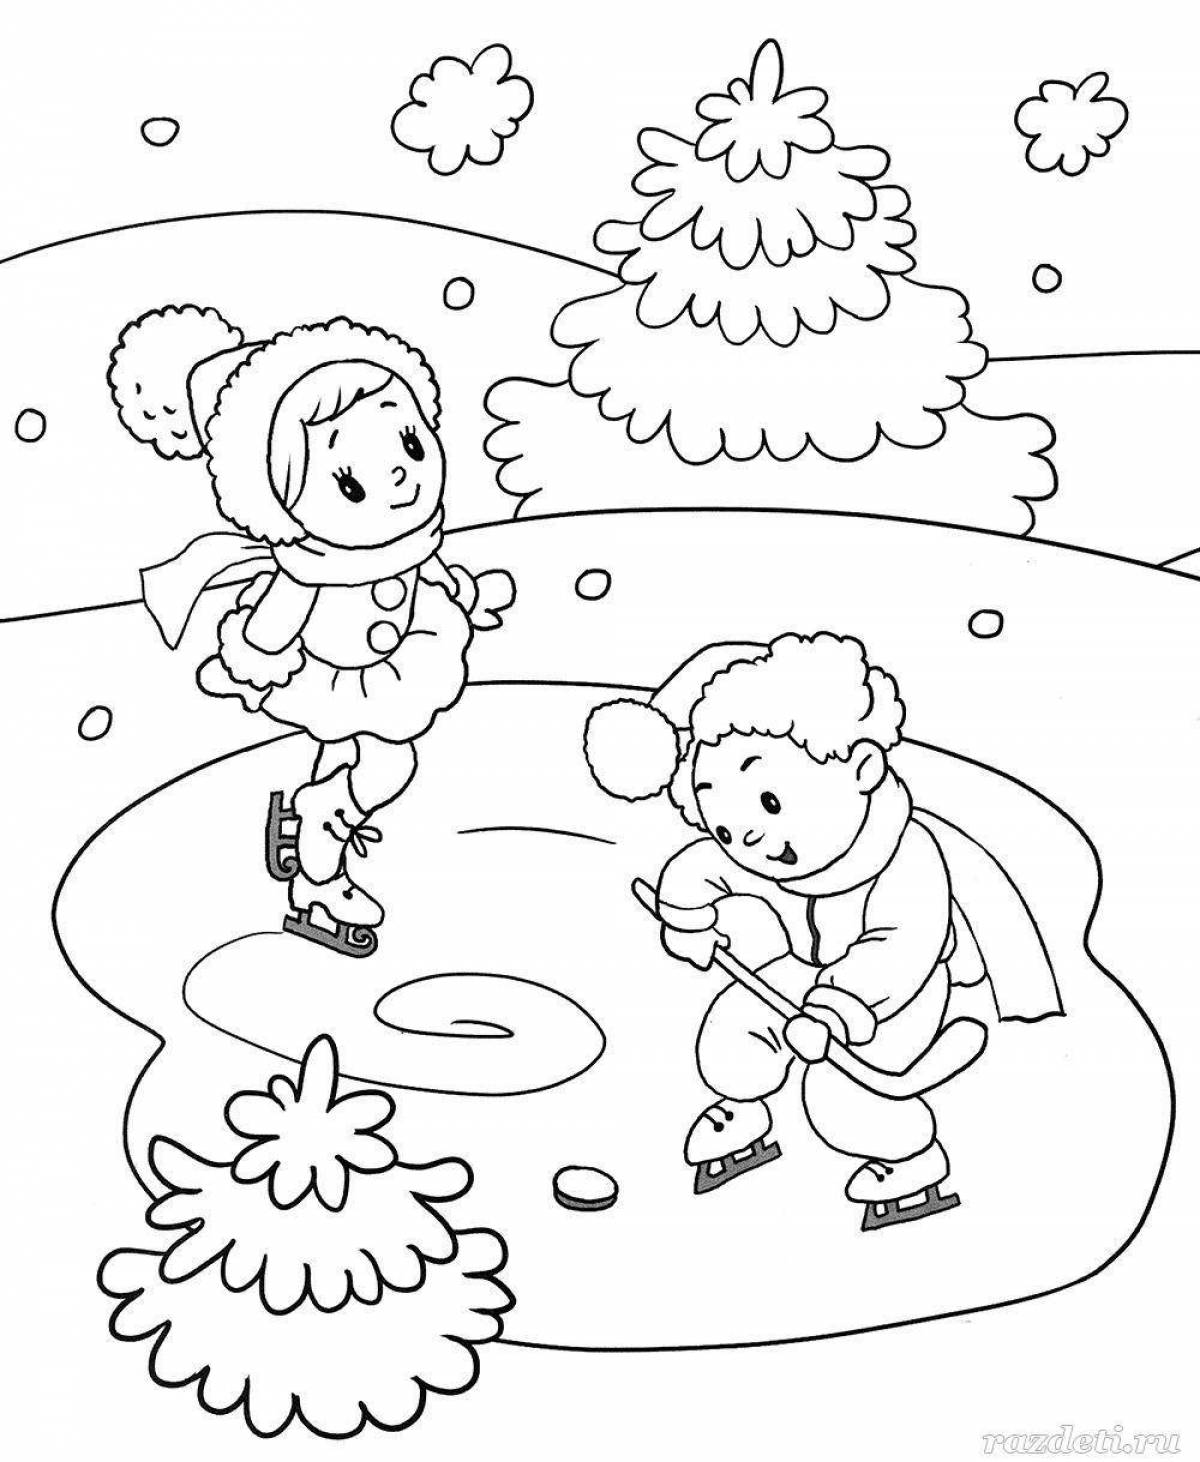 Merry winter coloring book for kids